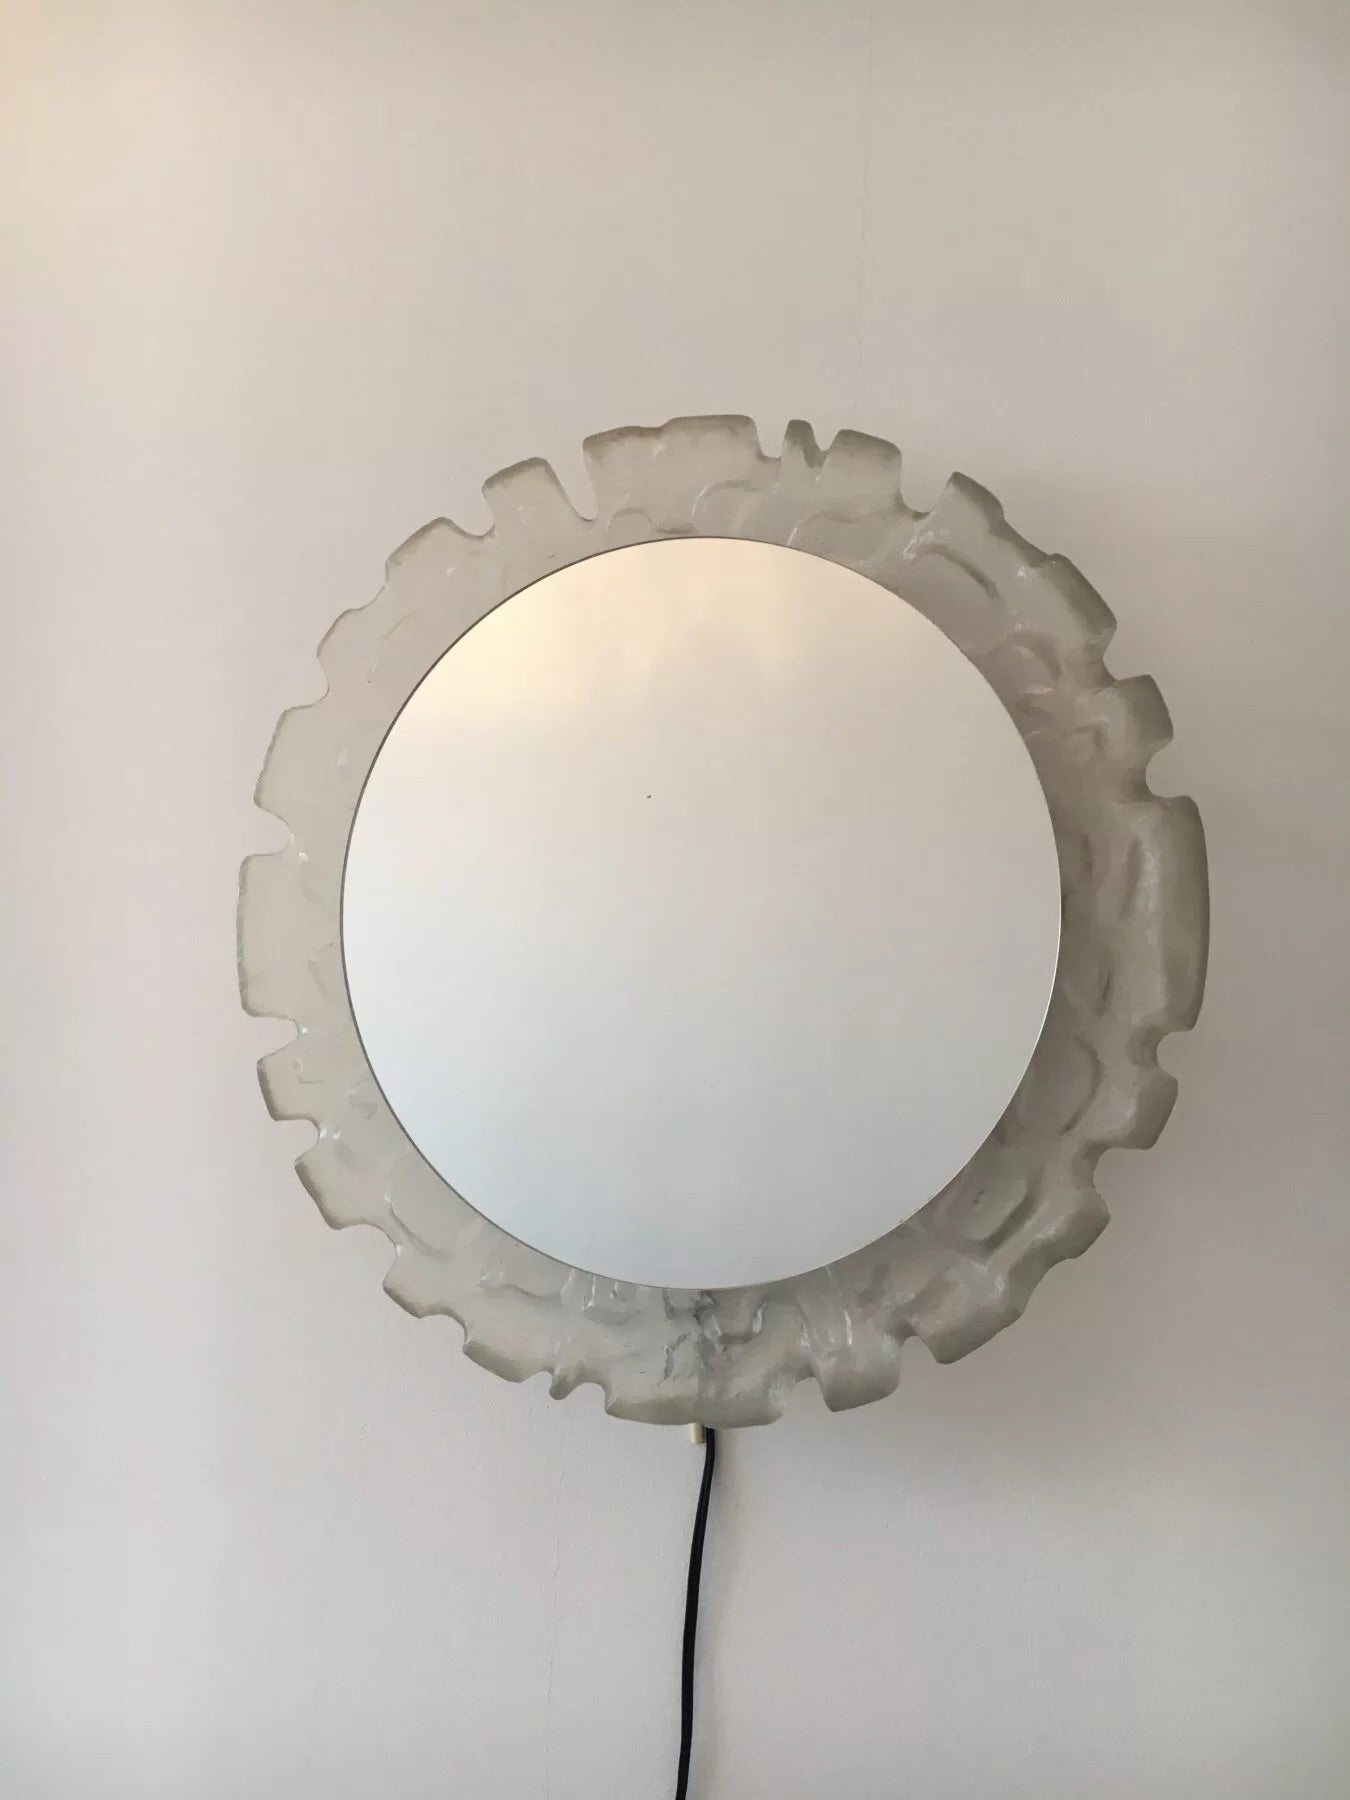 Hillebrand Lucite wall mirror with backlight